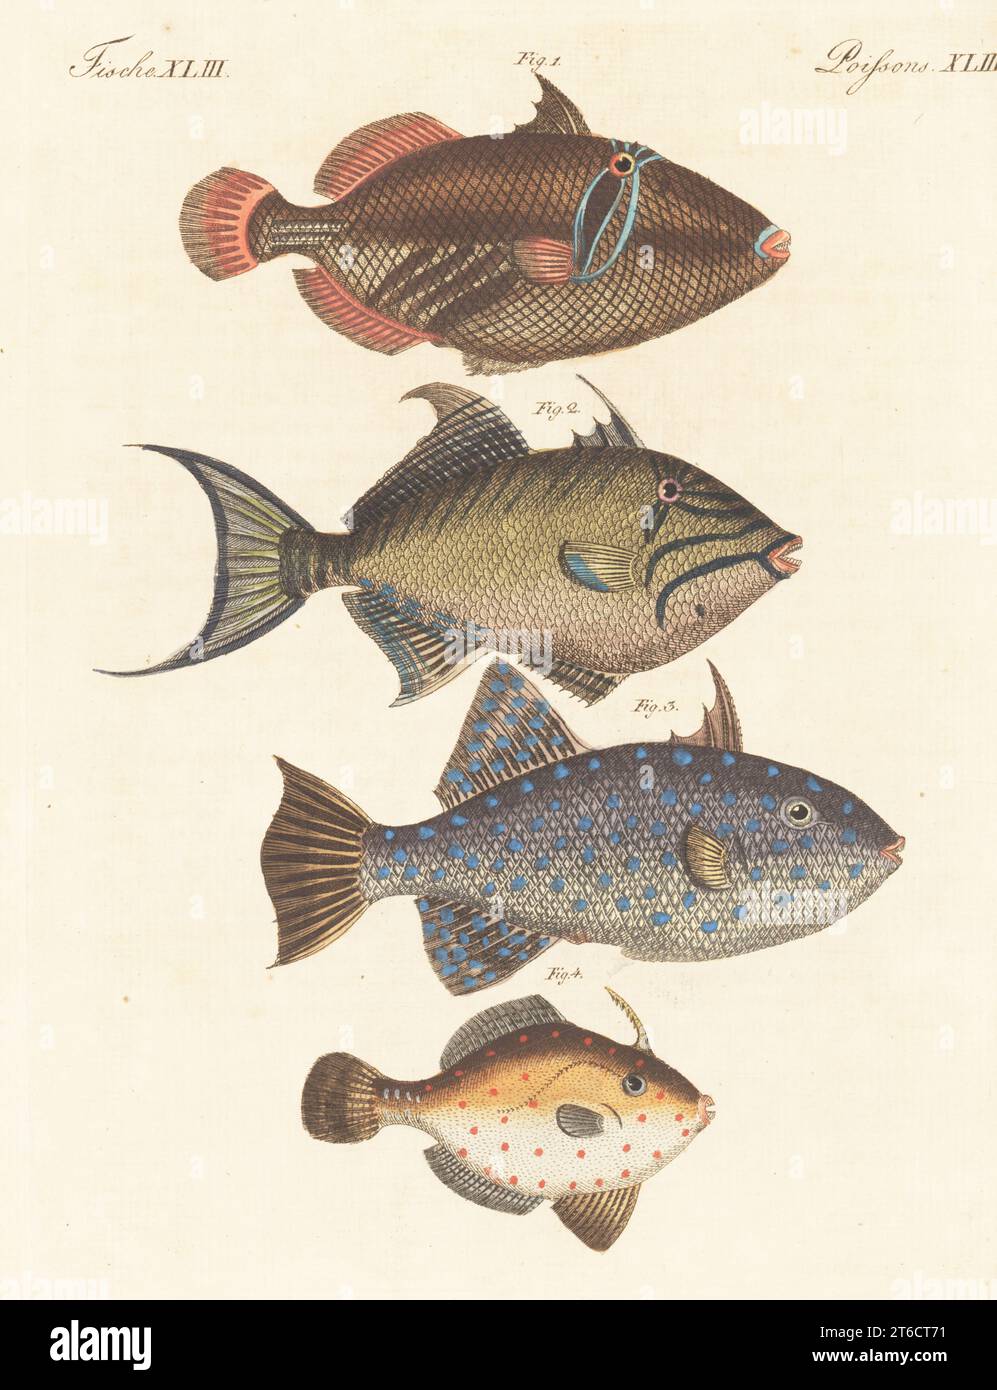 Lagoon triggerfish or Picassofish, Rhinecanthus aculeatus 1, queen triggerfish or old wife, Balistes vetula 2, rough triggerfish, Canthidermis maculata 3, and fan-bellied leatherjacket, Monacanthus chinensis 4. Handcoloured copperplate engraving from Carl Bertuch's Bilderbuch fur Kinder (Picture Book for Children), Weimar, 1813. A 12-volume encyclopedia for children illustrated with almost 1,200 engraved plates on natural history, science, costume, mythology, etc., published from 1790-1830. Stock Photo